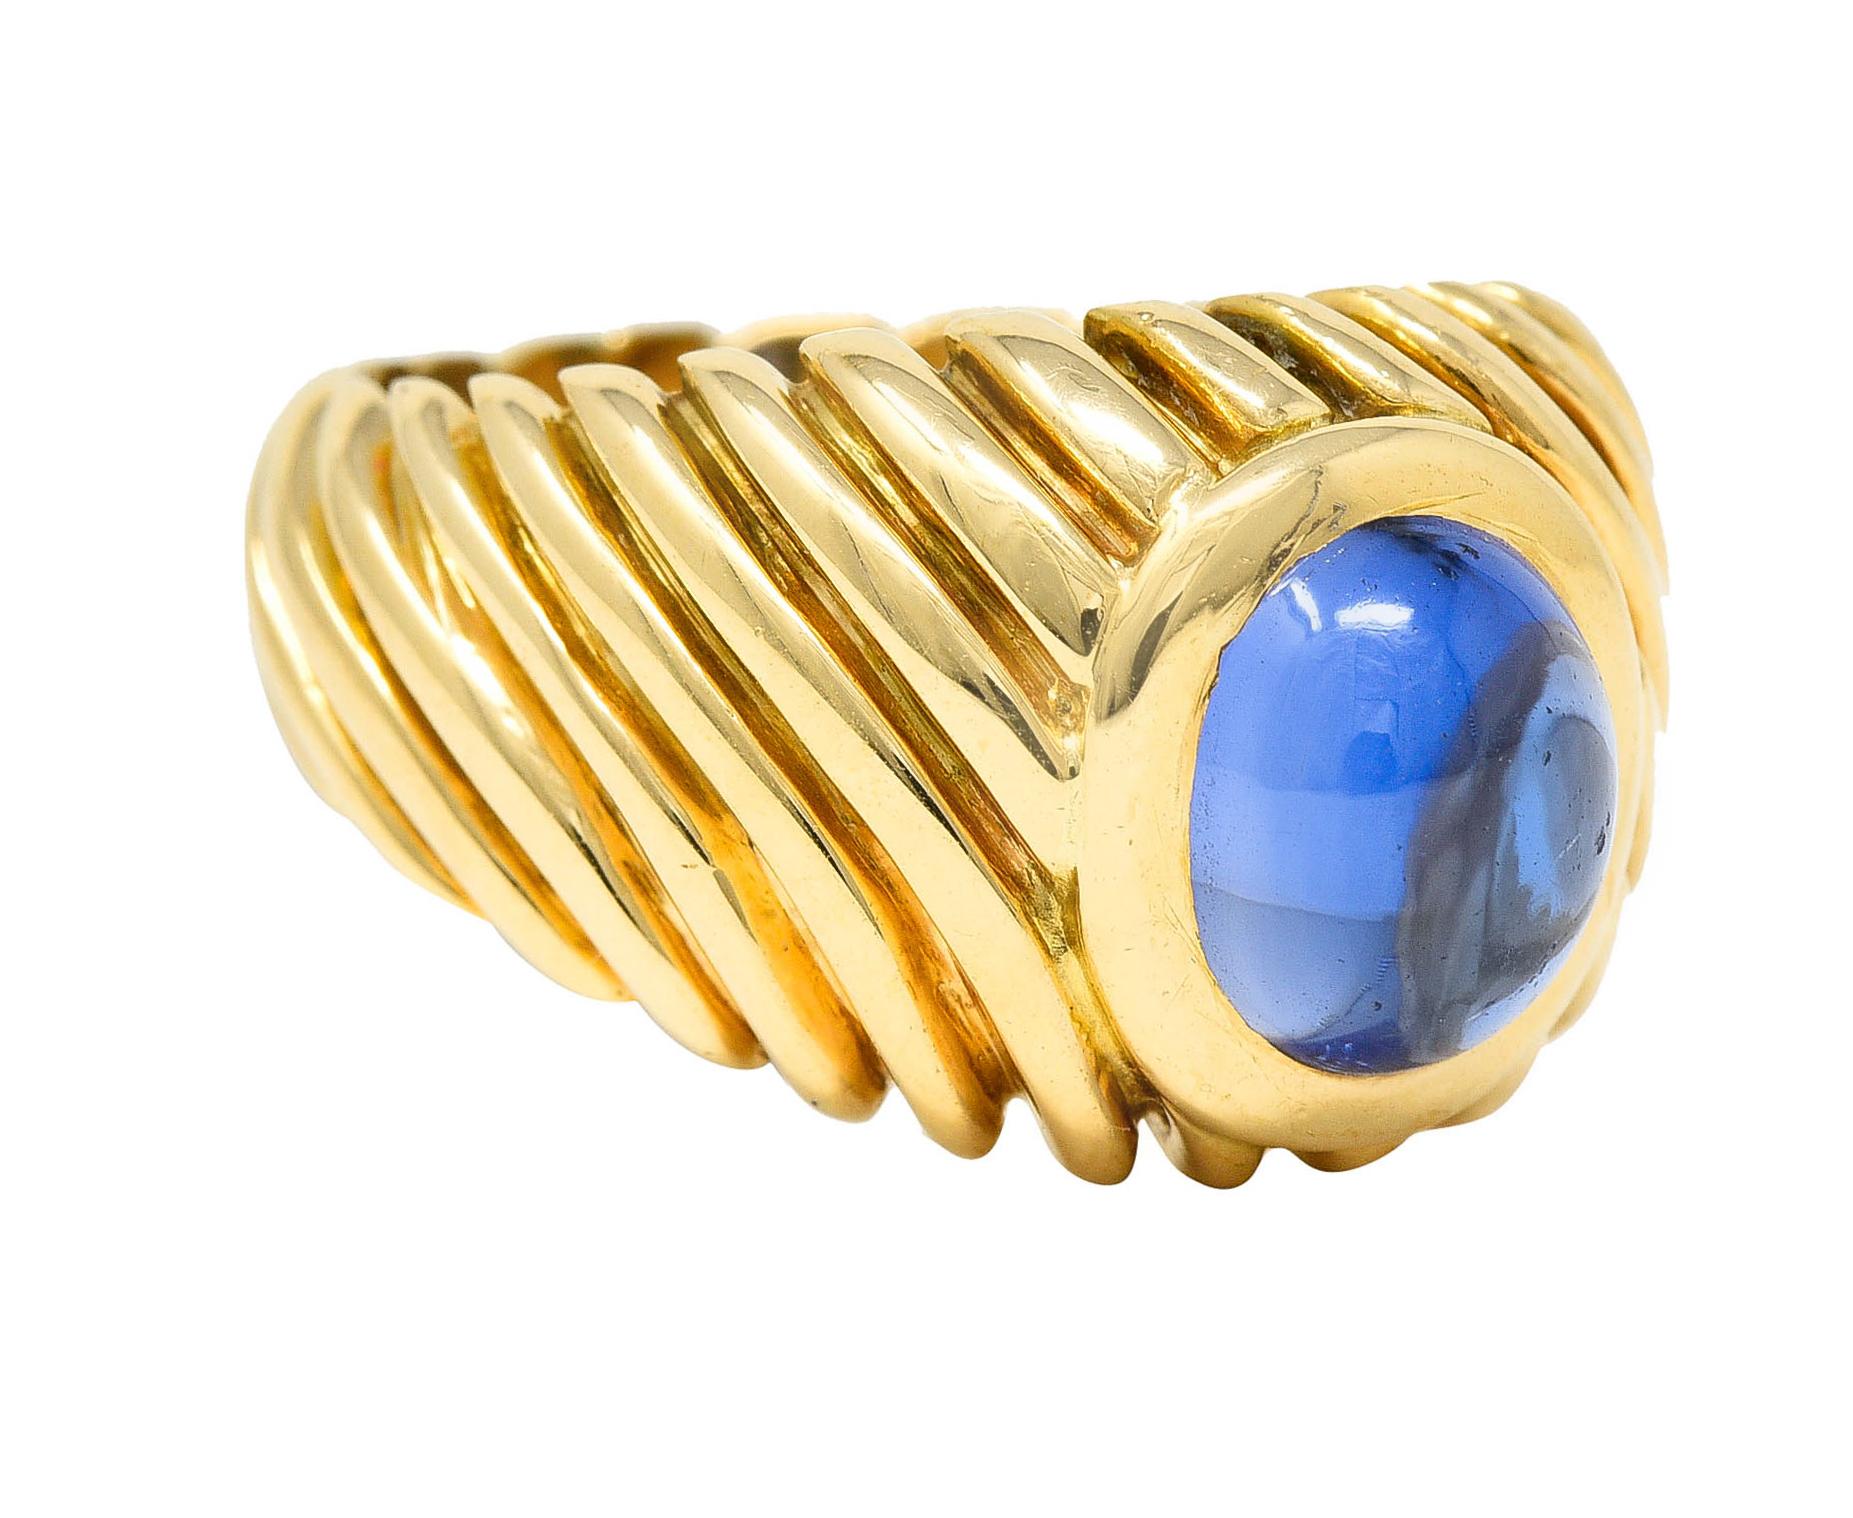 Signet style ring features an oval sapphire cabochon

Violetish blue in color while weighing approximately 2.85 carats

Bezel set in a polished gold surround of a deeply ridged mounting

Tested as 18 karat gold

Circa: 1960s

Ring Size: 5 3/4 &